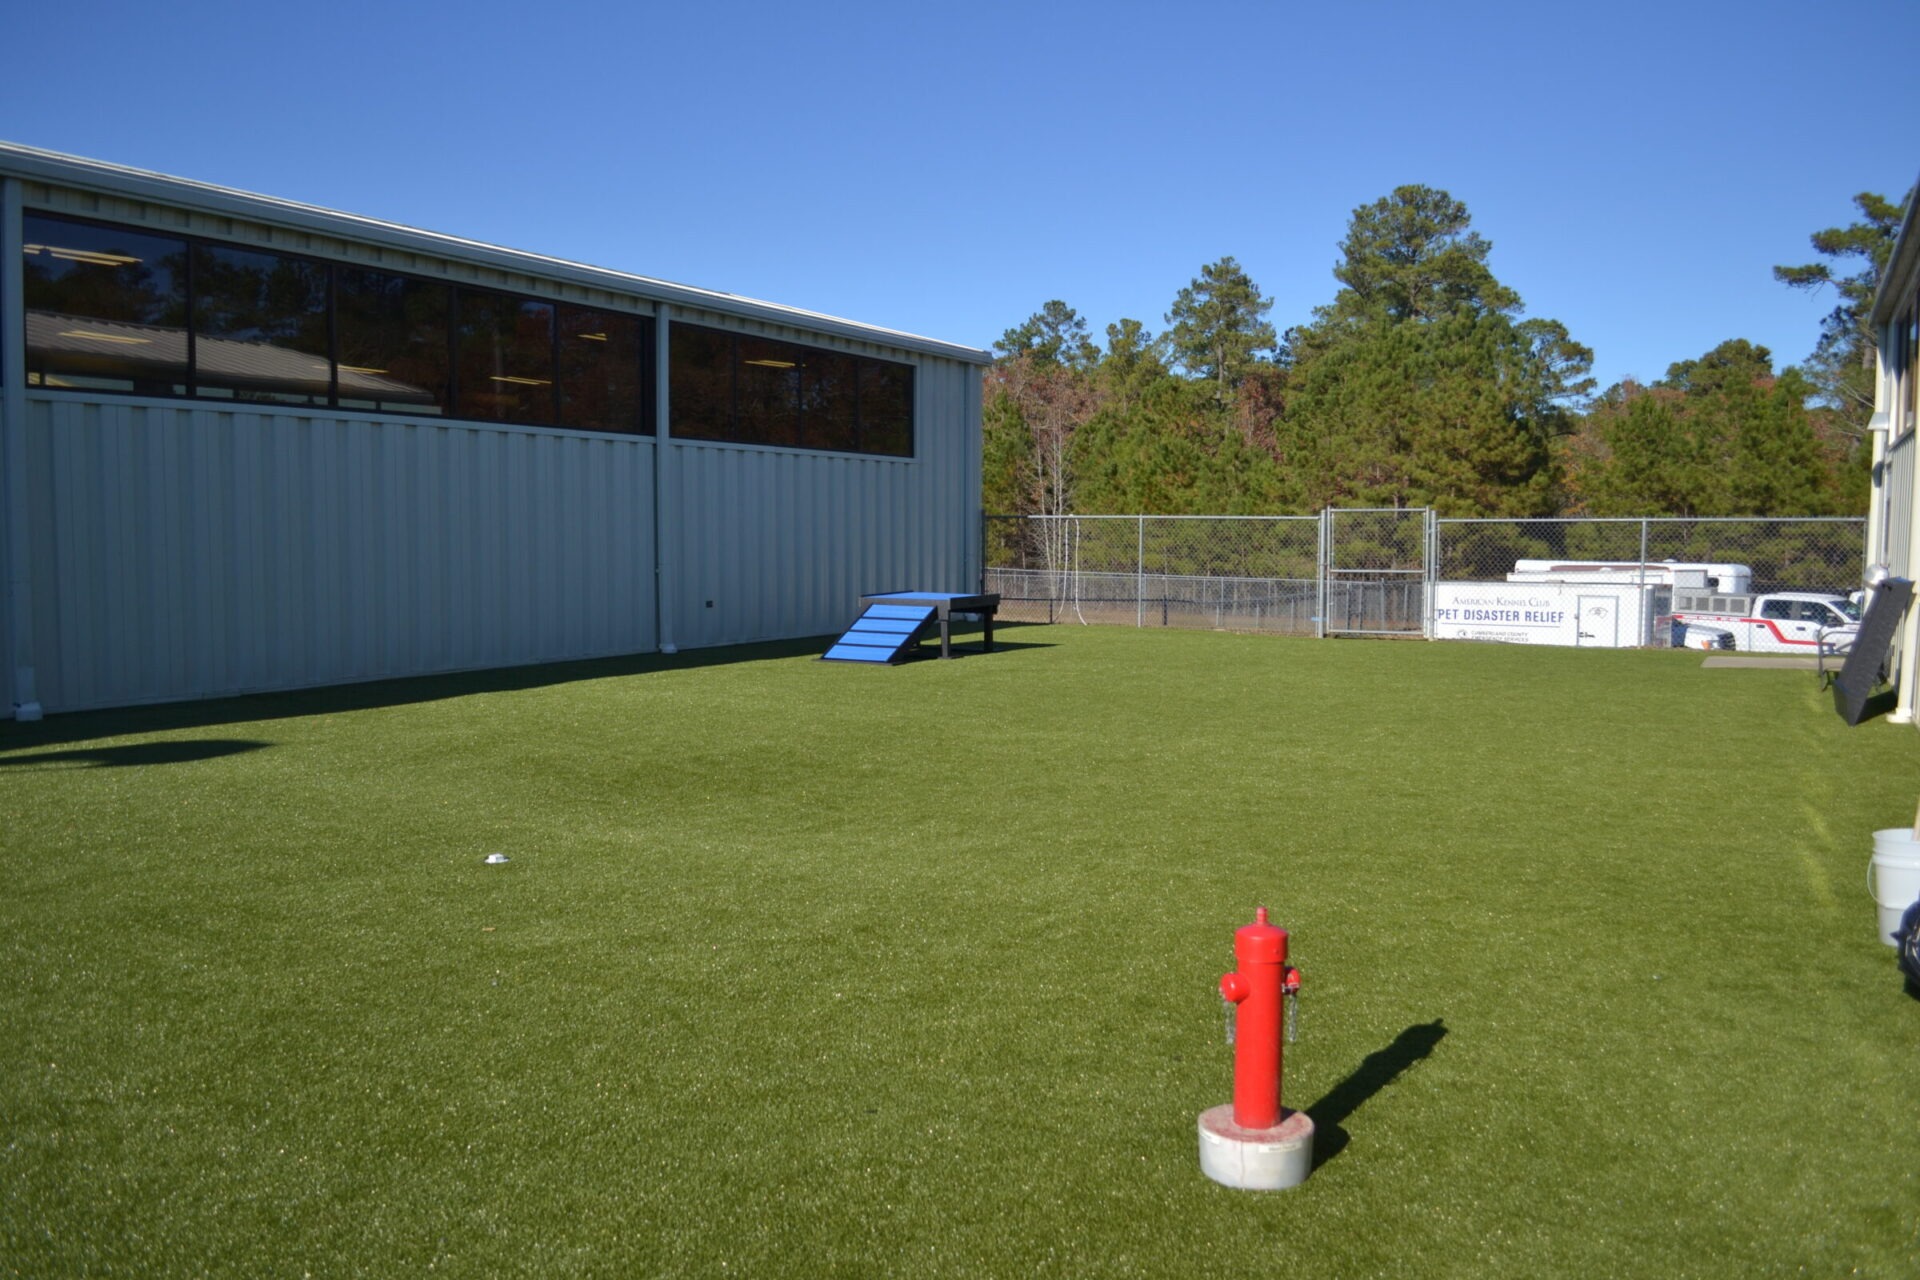 The image shows an outdoor area with artificial turf, a fire hydrant, a blue ramp, a chain-link fence, trees, and a metal building.